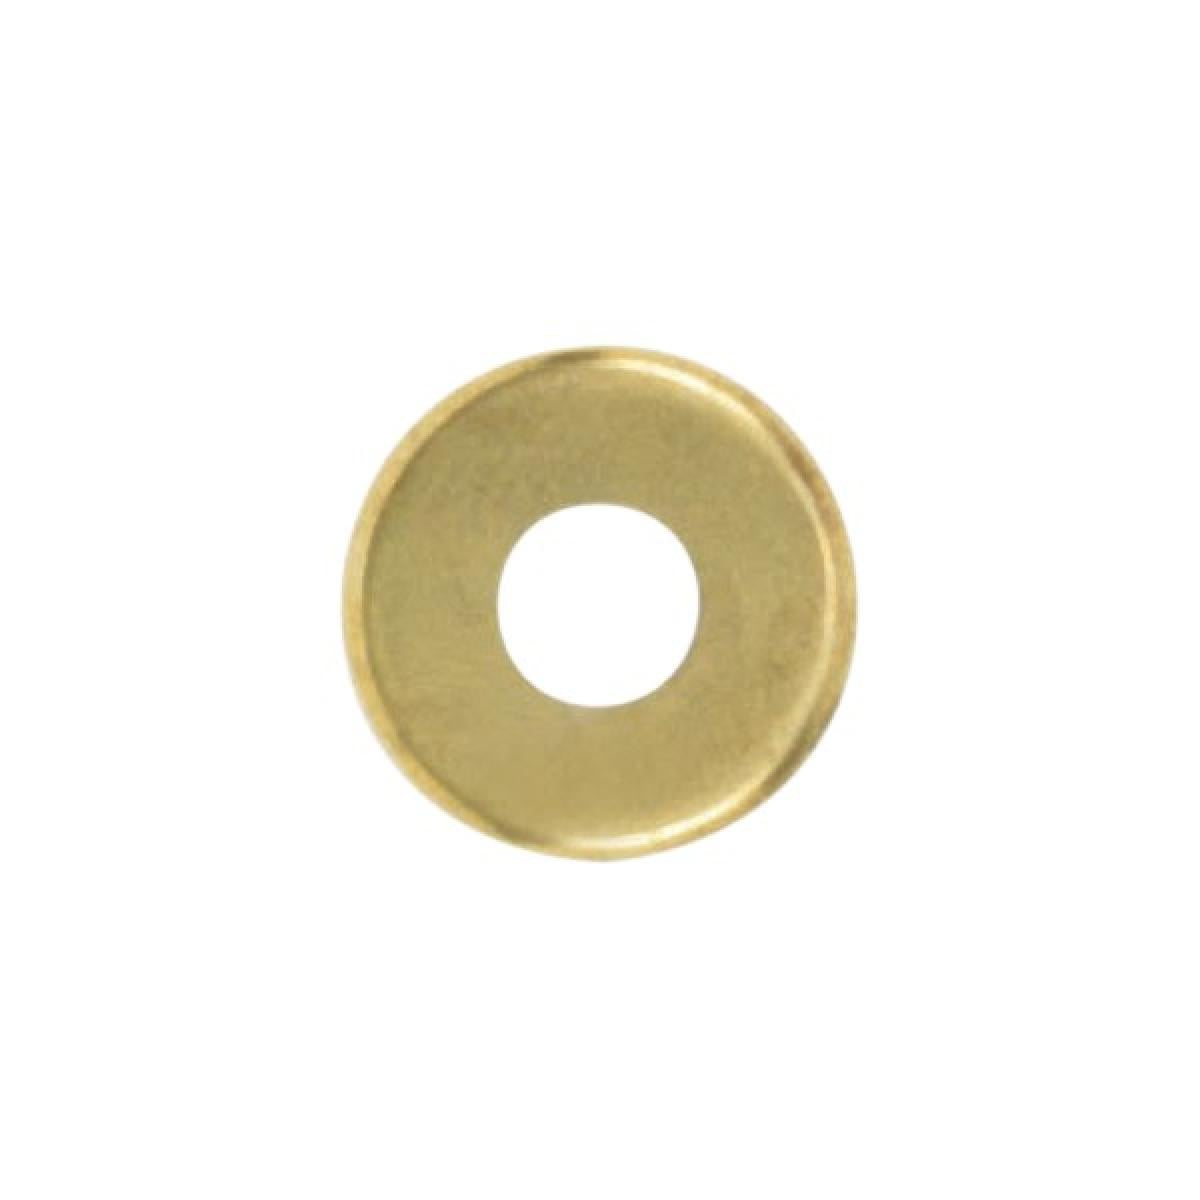 Satco 90-1092 Turned Brass Check Ring 1/8 IP Slip Burnished And Lacquered 1-1/2" Diameter